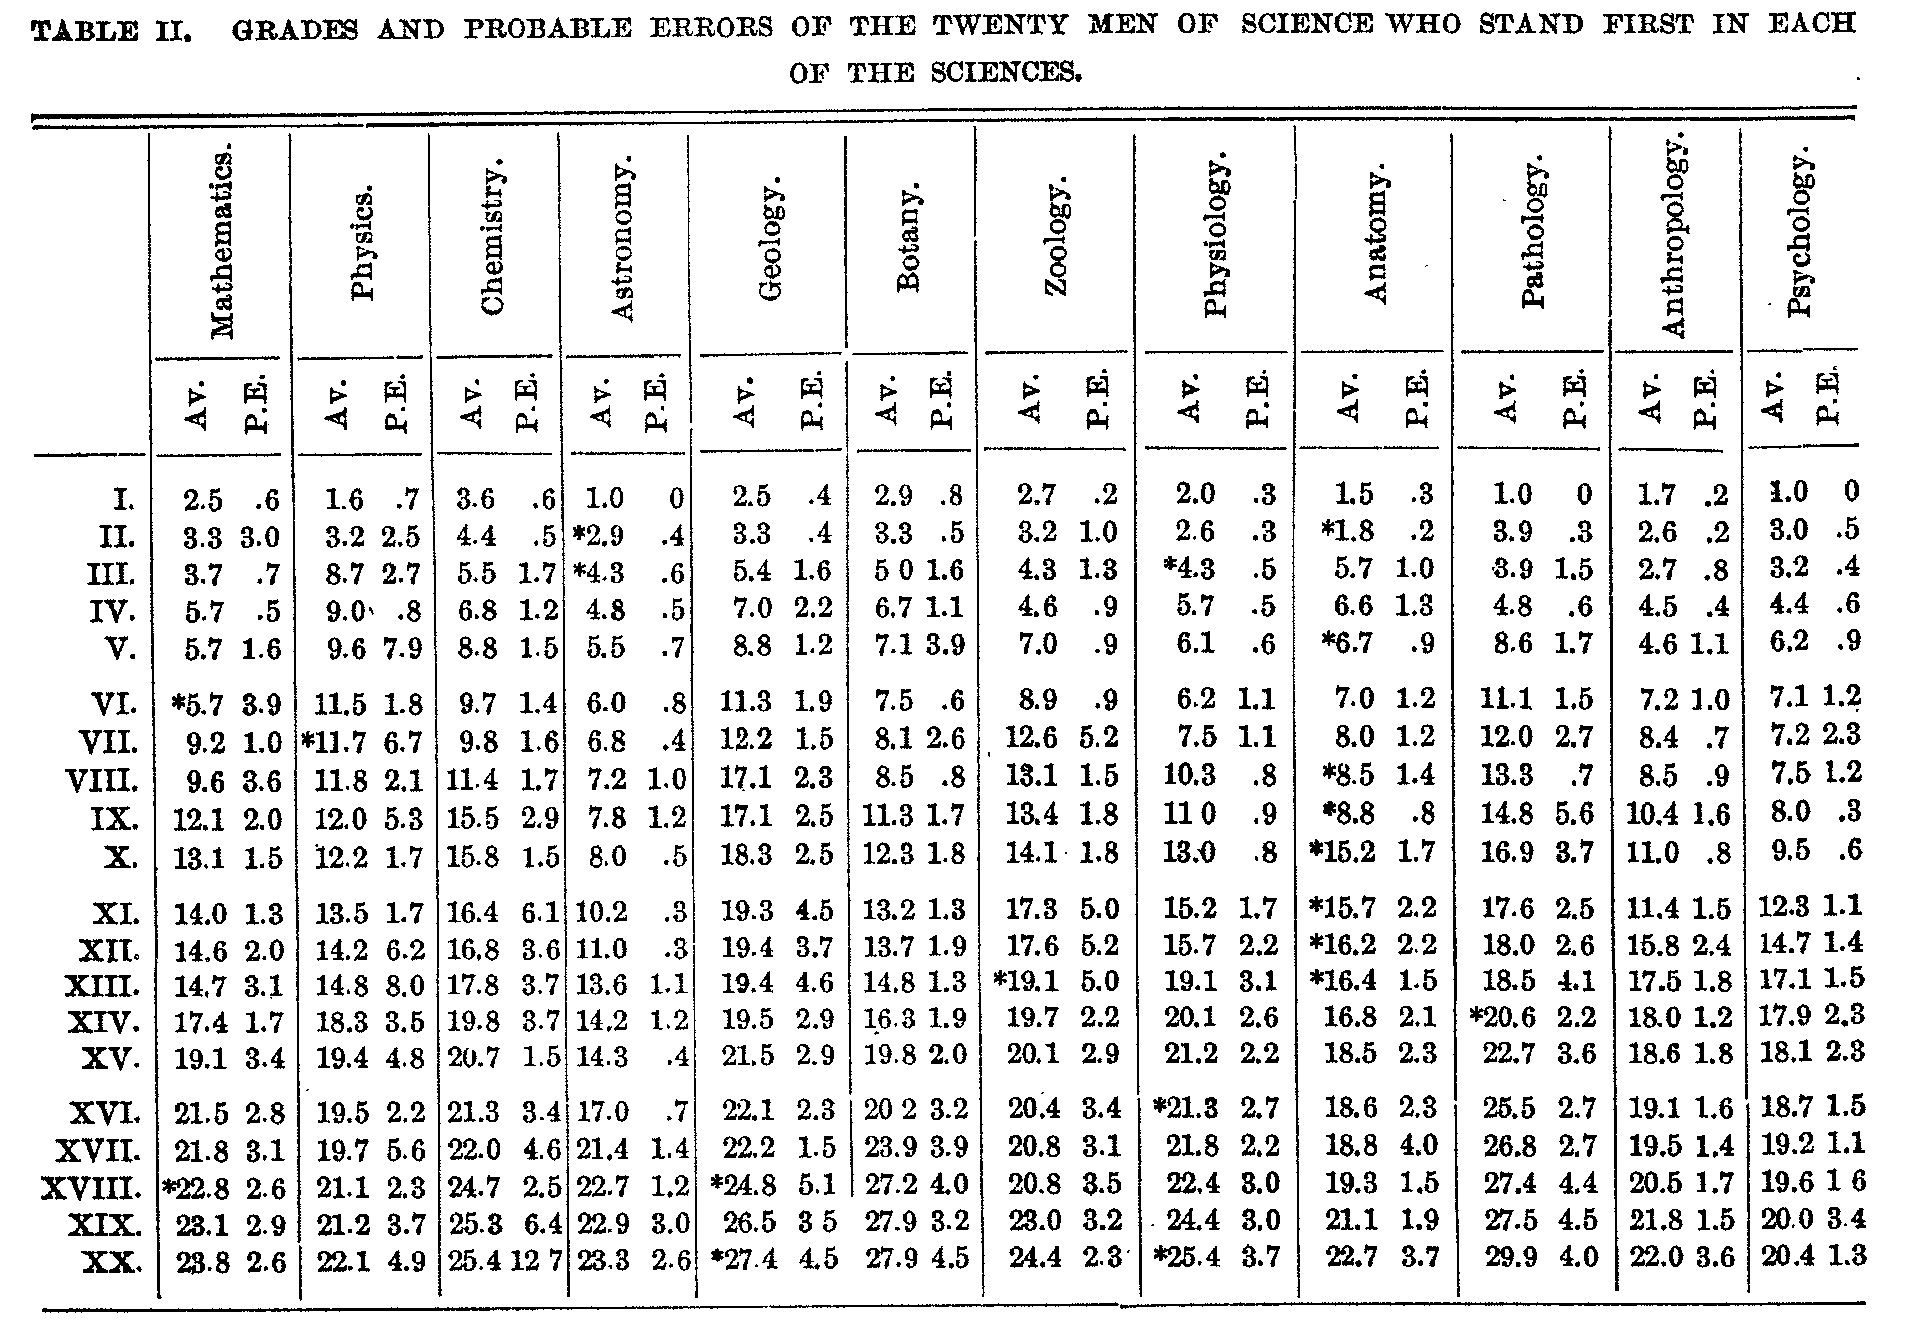 Table 2, Grades and probable errors of the 20 men of science who stand in first in each of the sciences